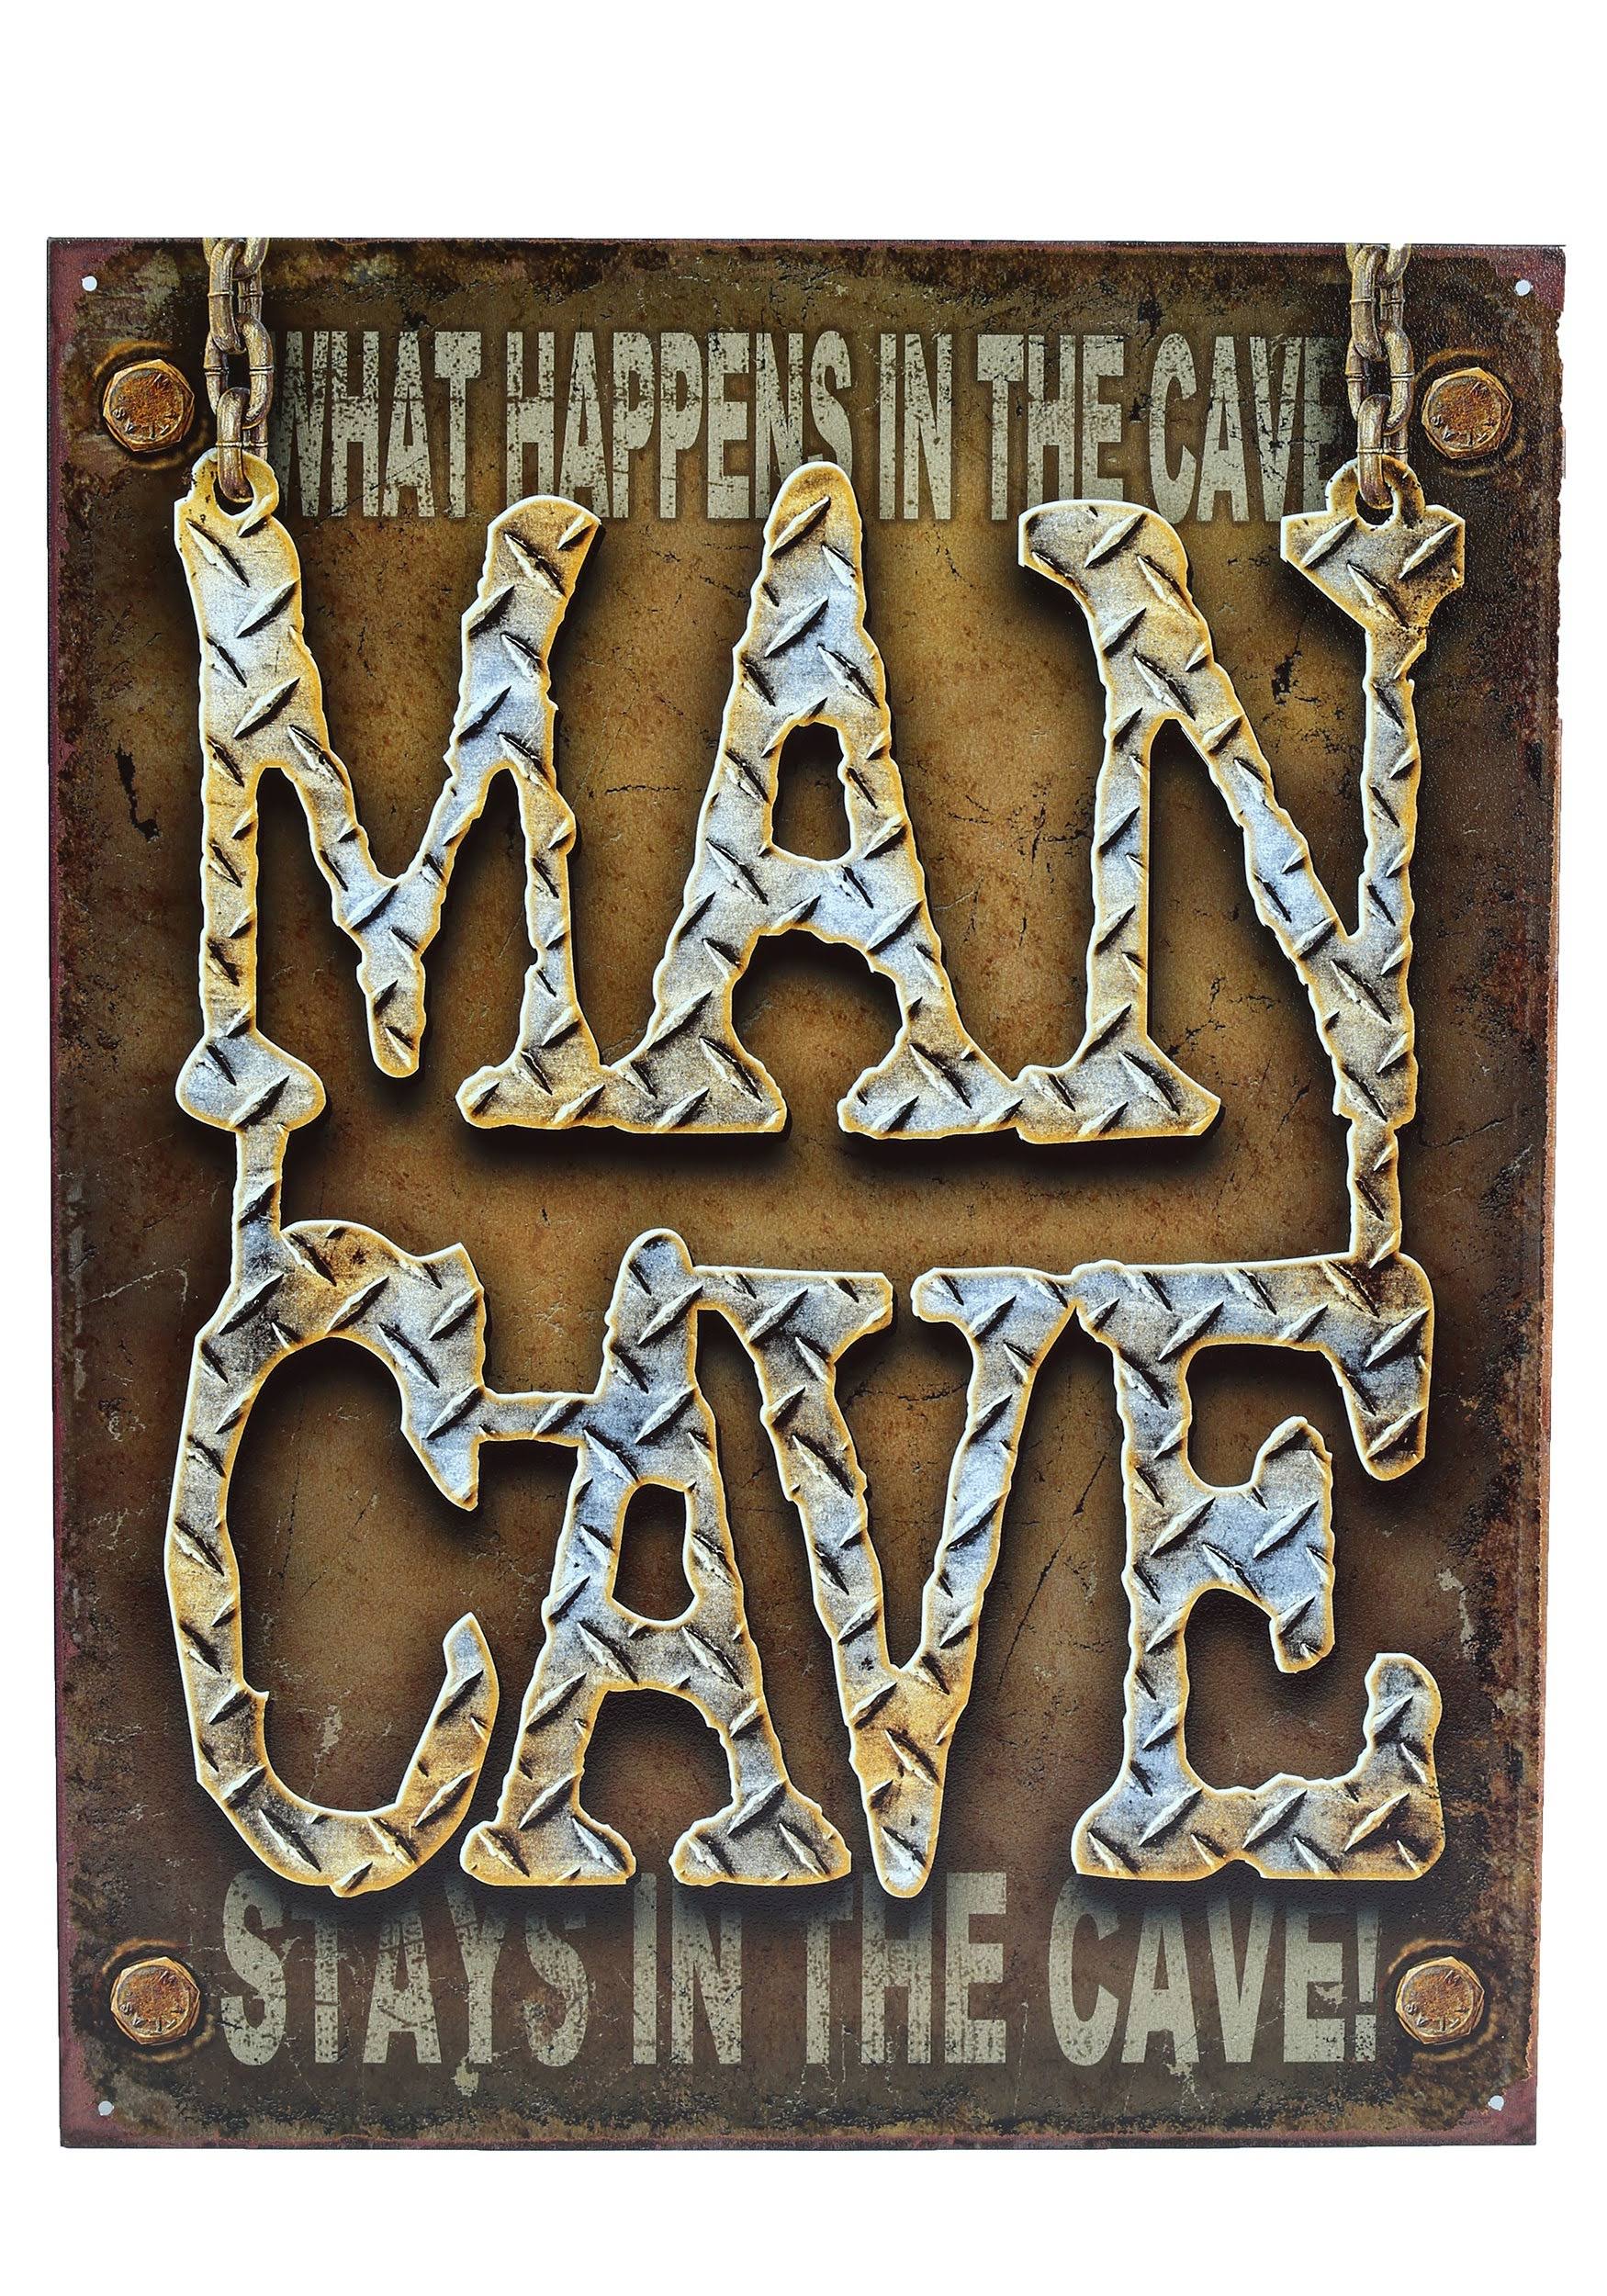 Man Cave Wwhat Happens In The Cave Tin Sign - 12" x 16"